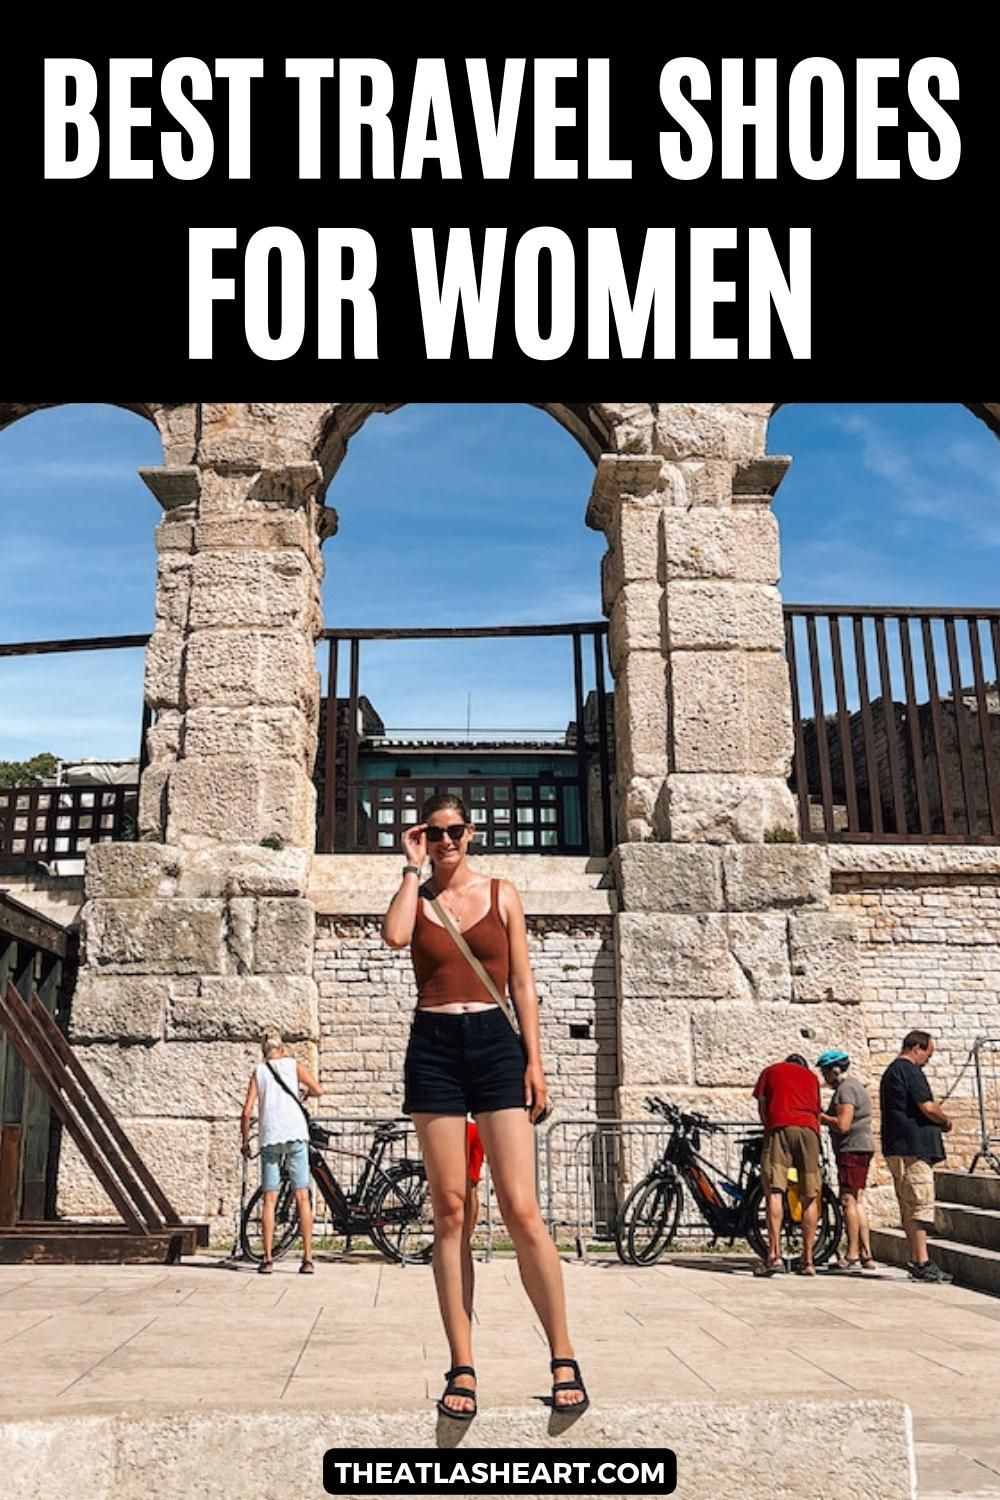 A young woman wearing black shorts, a burnt orange tank top and black sandals stands in front of the Roman Colosseum, with the text overlay, "Best Travel Shoes for Women."